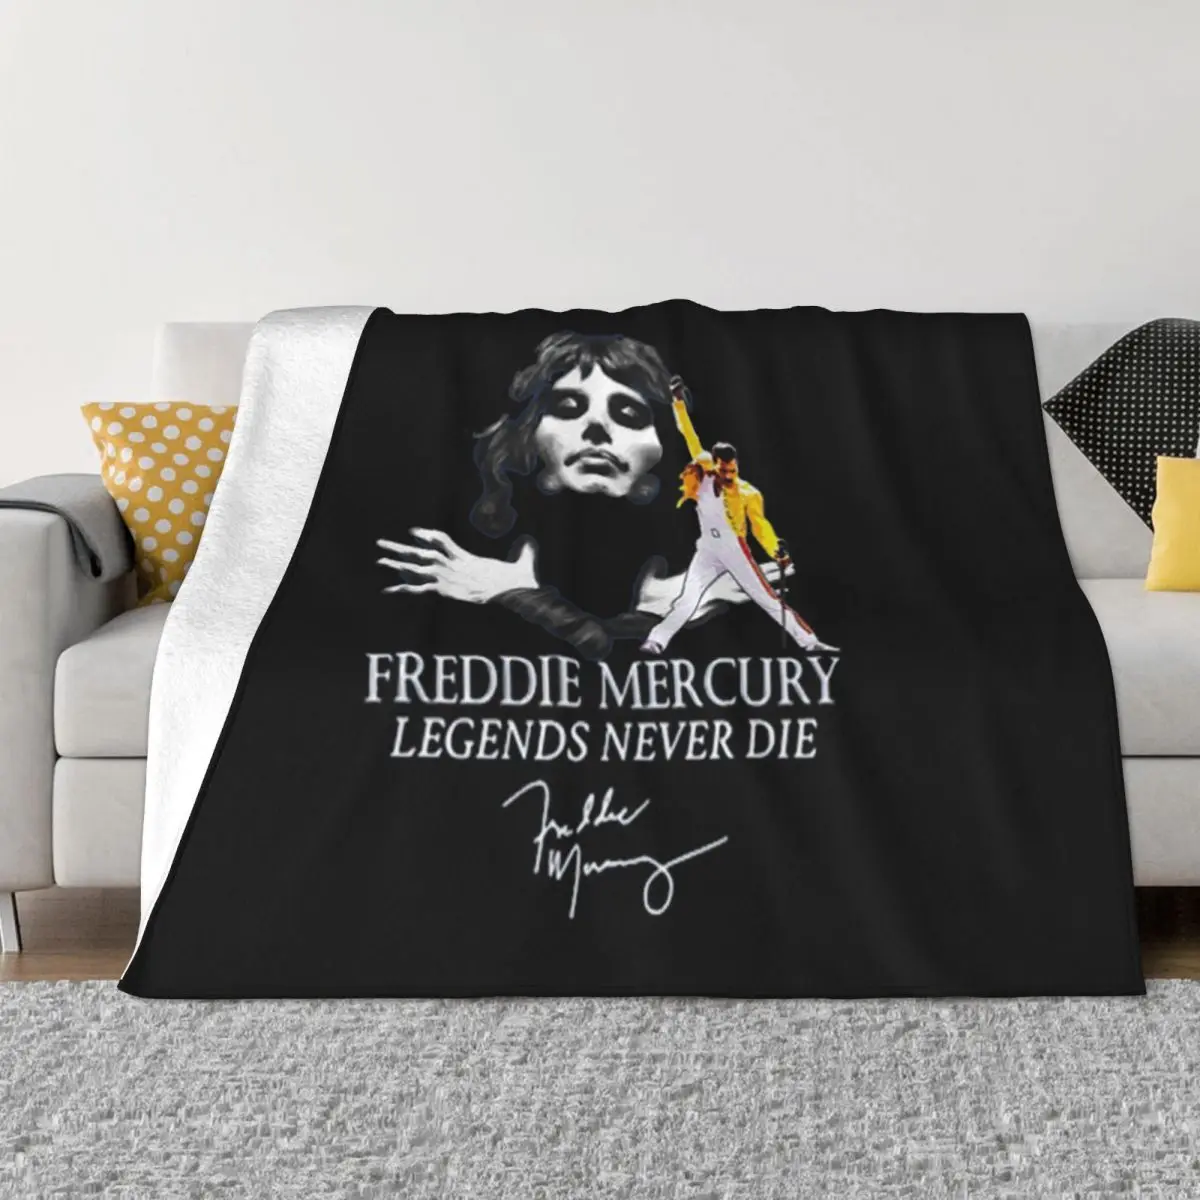 

Freddie Mercury Legends Never Die Bed Fuzzy Winter Cover on Bed Soft and Fluffy Blanket Bed Washable Anti-pilling Non-stick